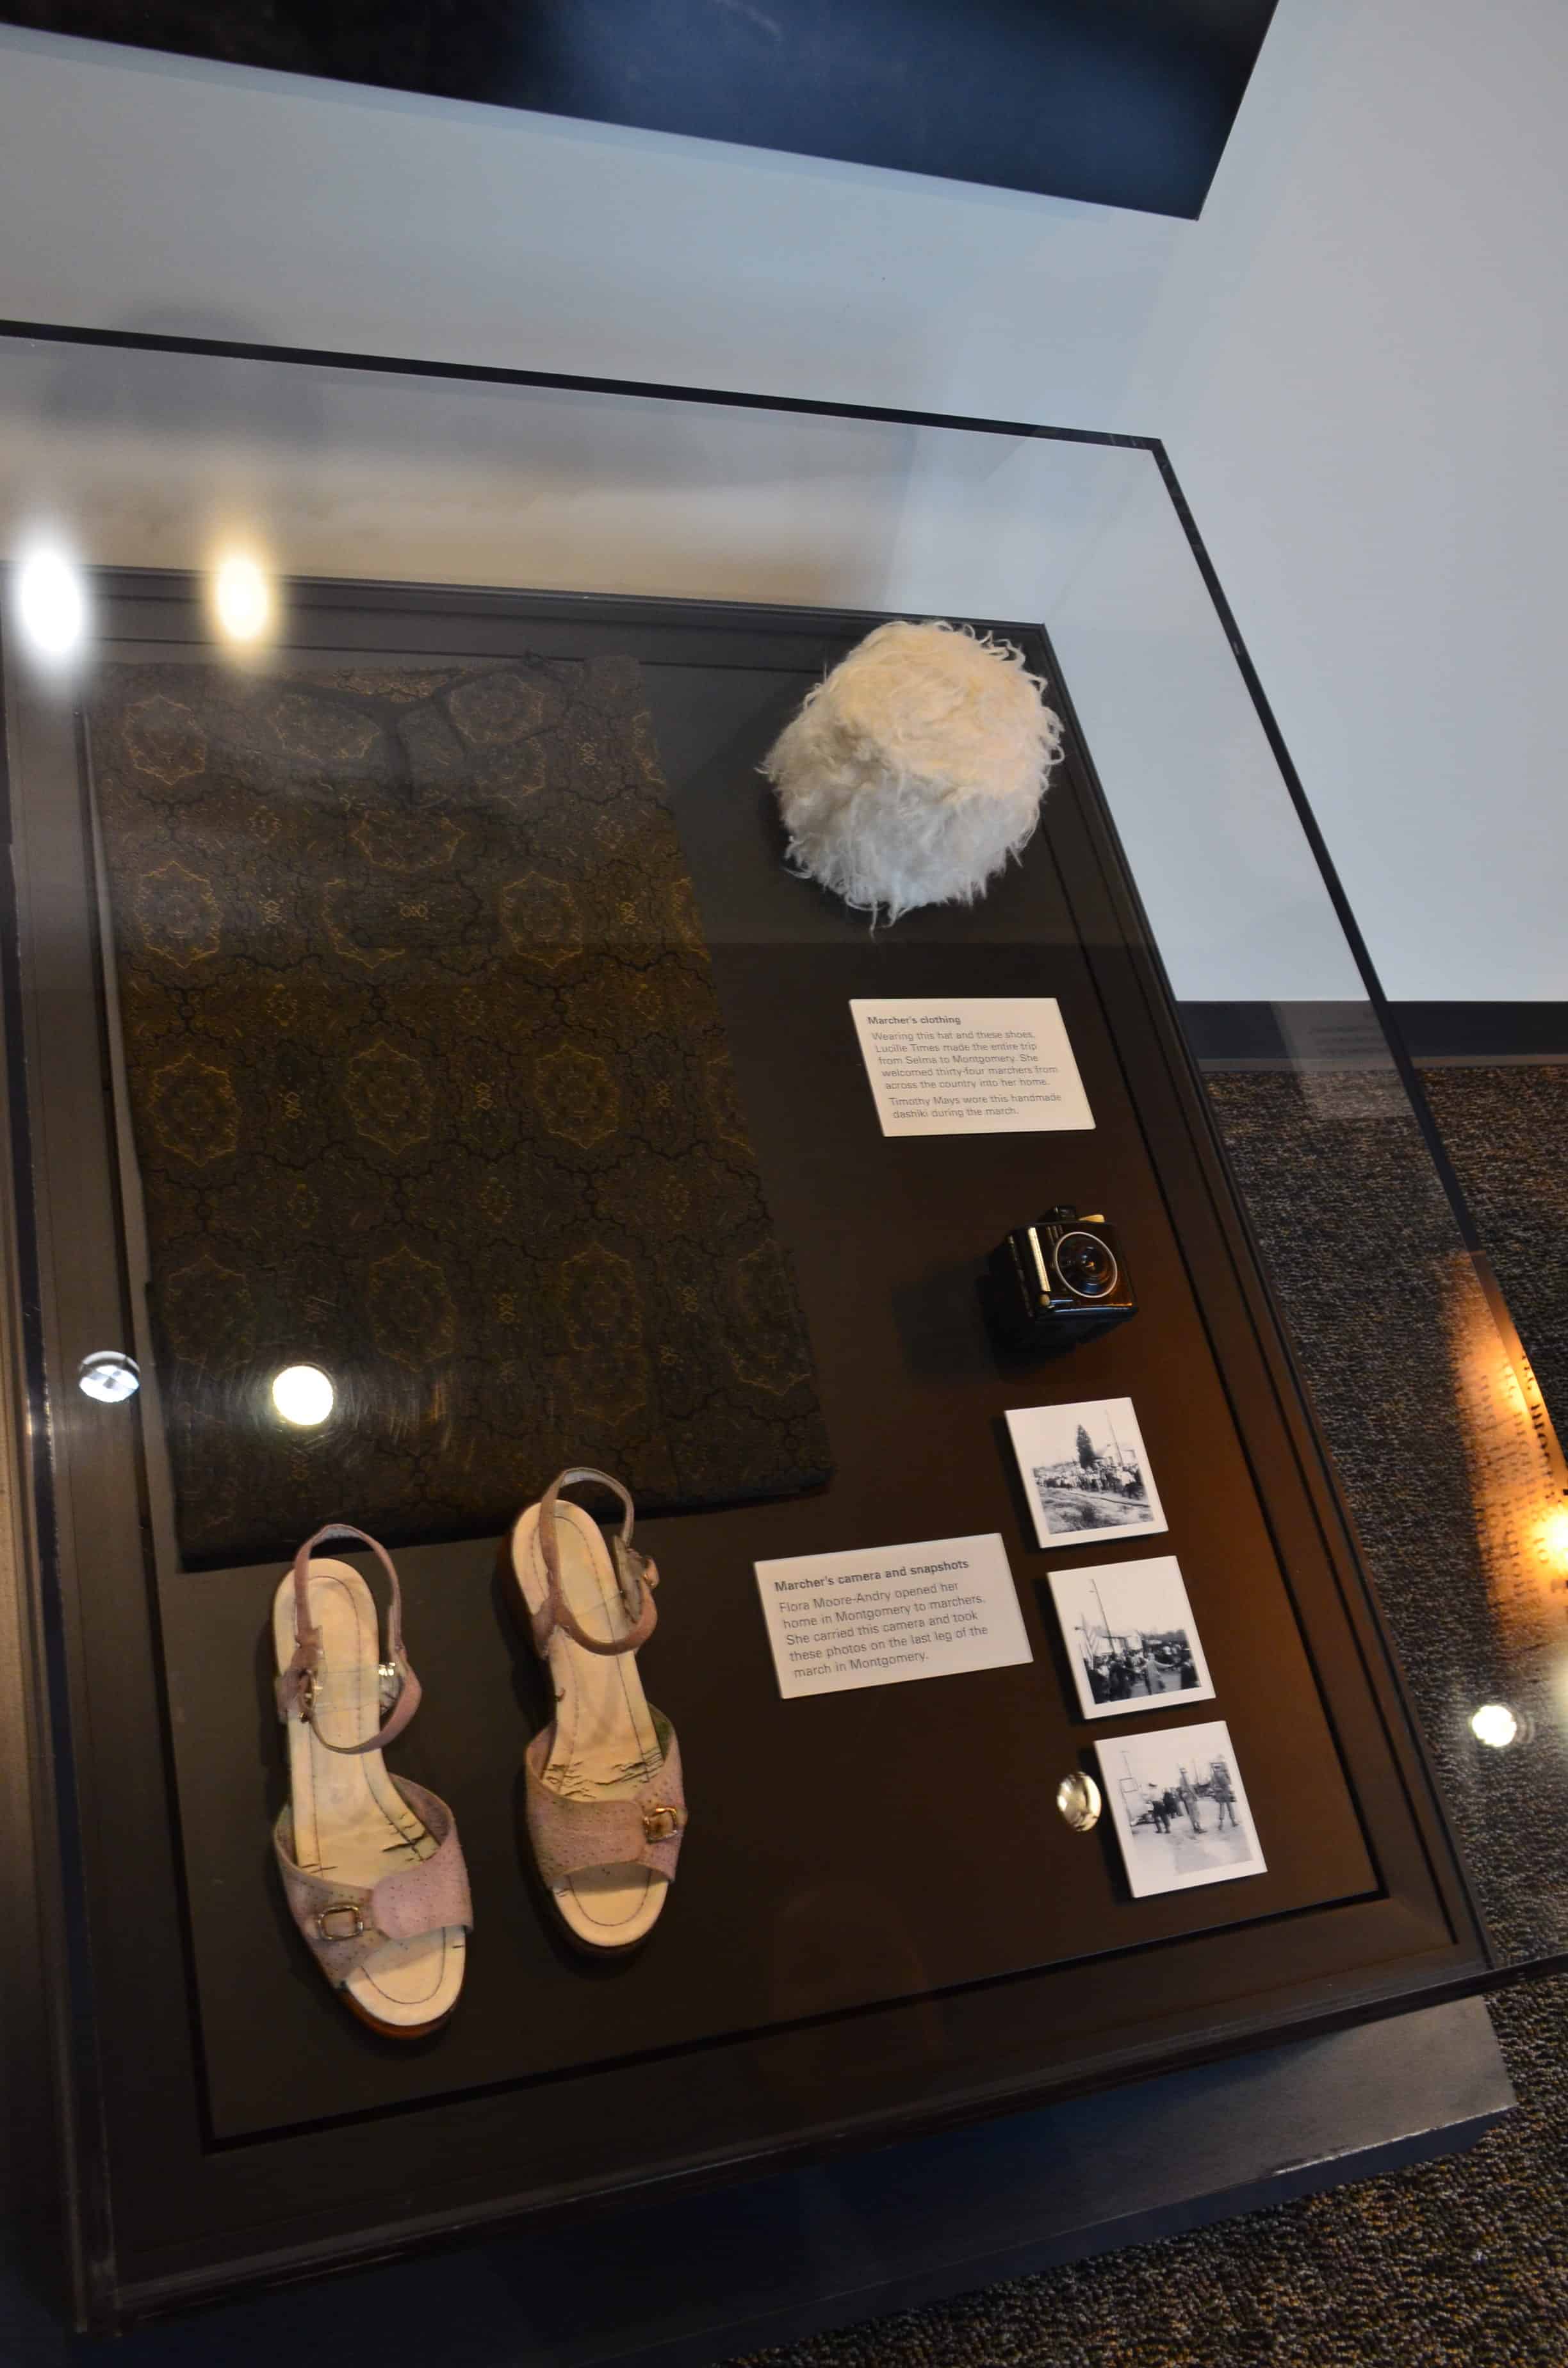 Marcher's clothing and camera at the Lowndes Interpretive Center on the Selma to Montgomery National Historic Trail in Alabama